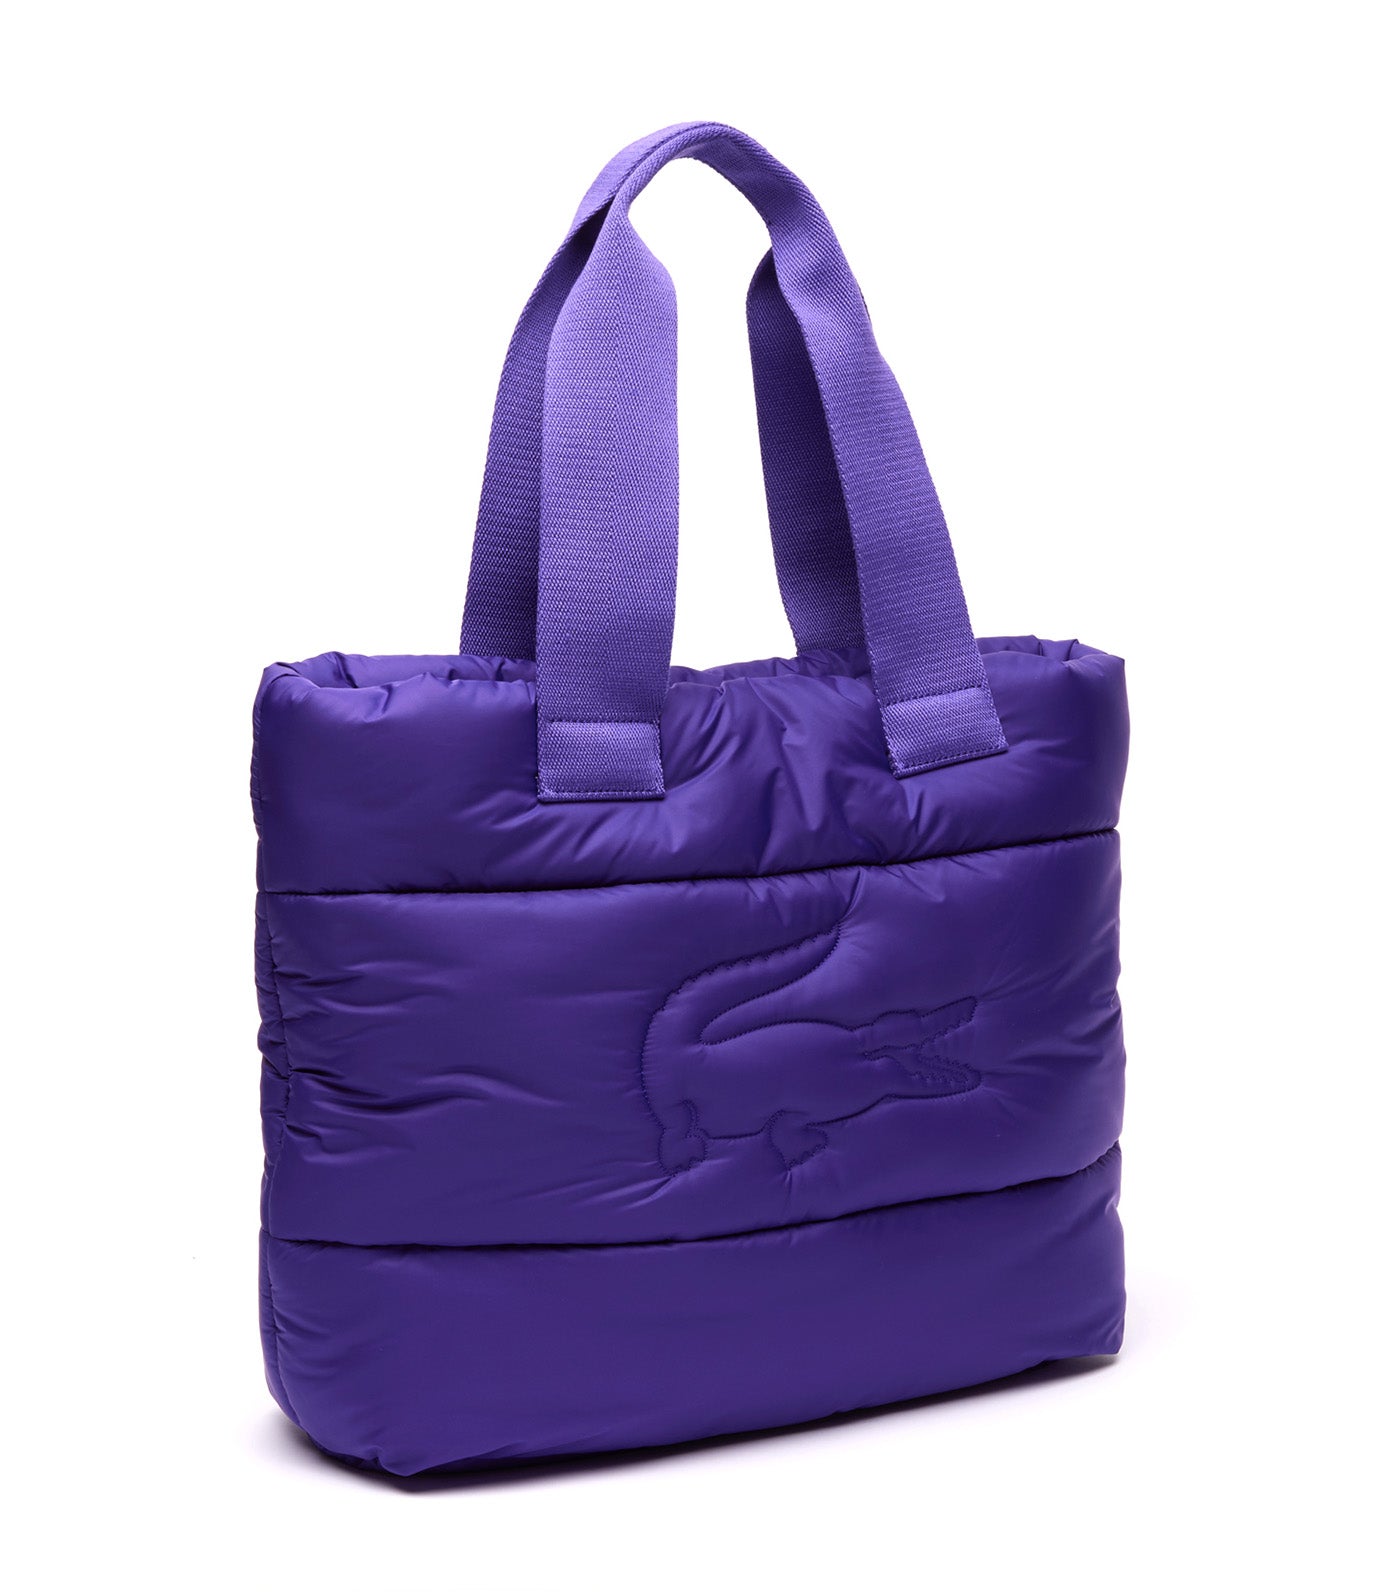 Puffy Croc Quilted Tote Acai